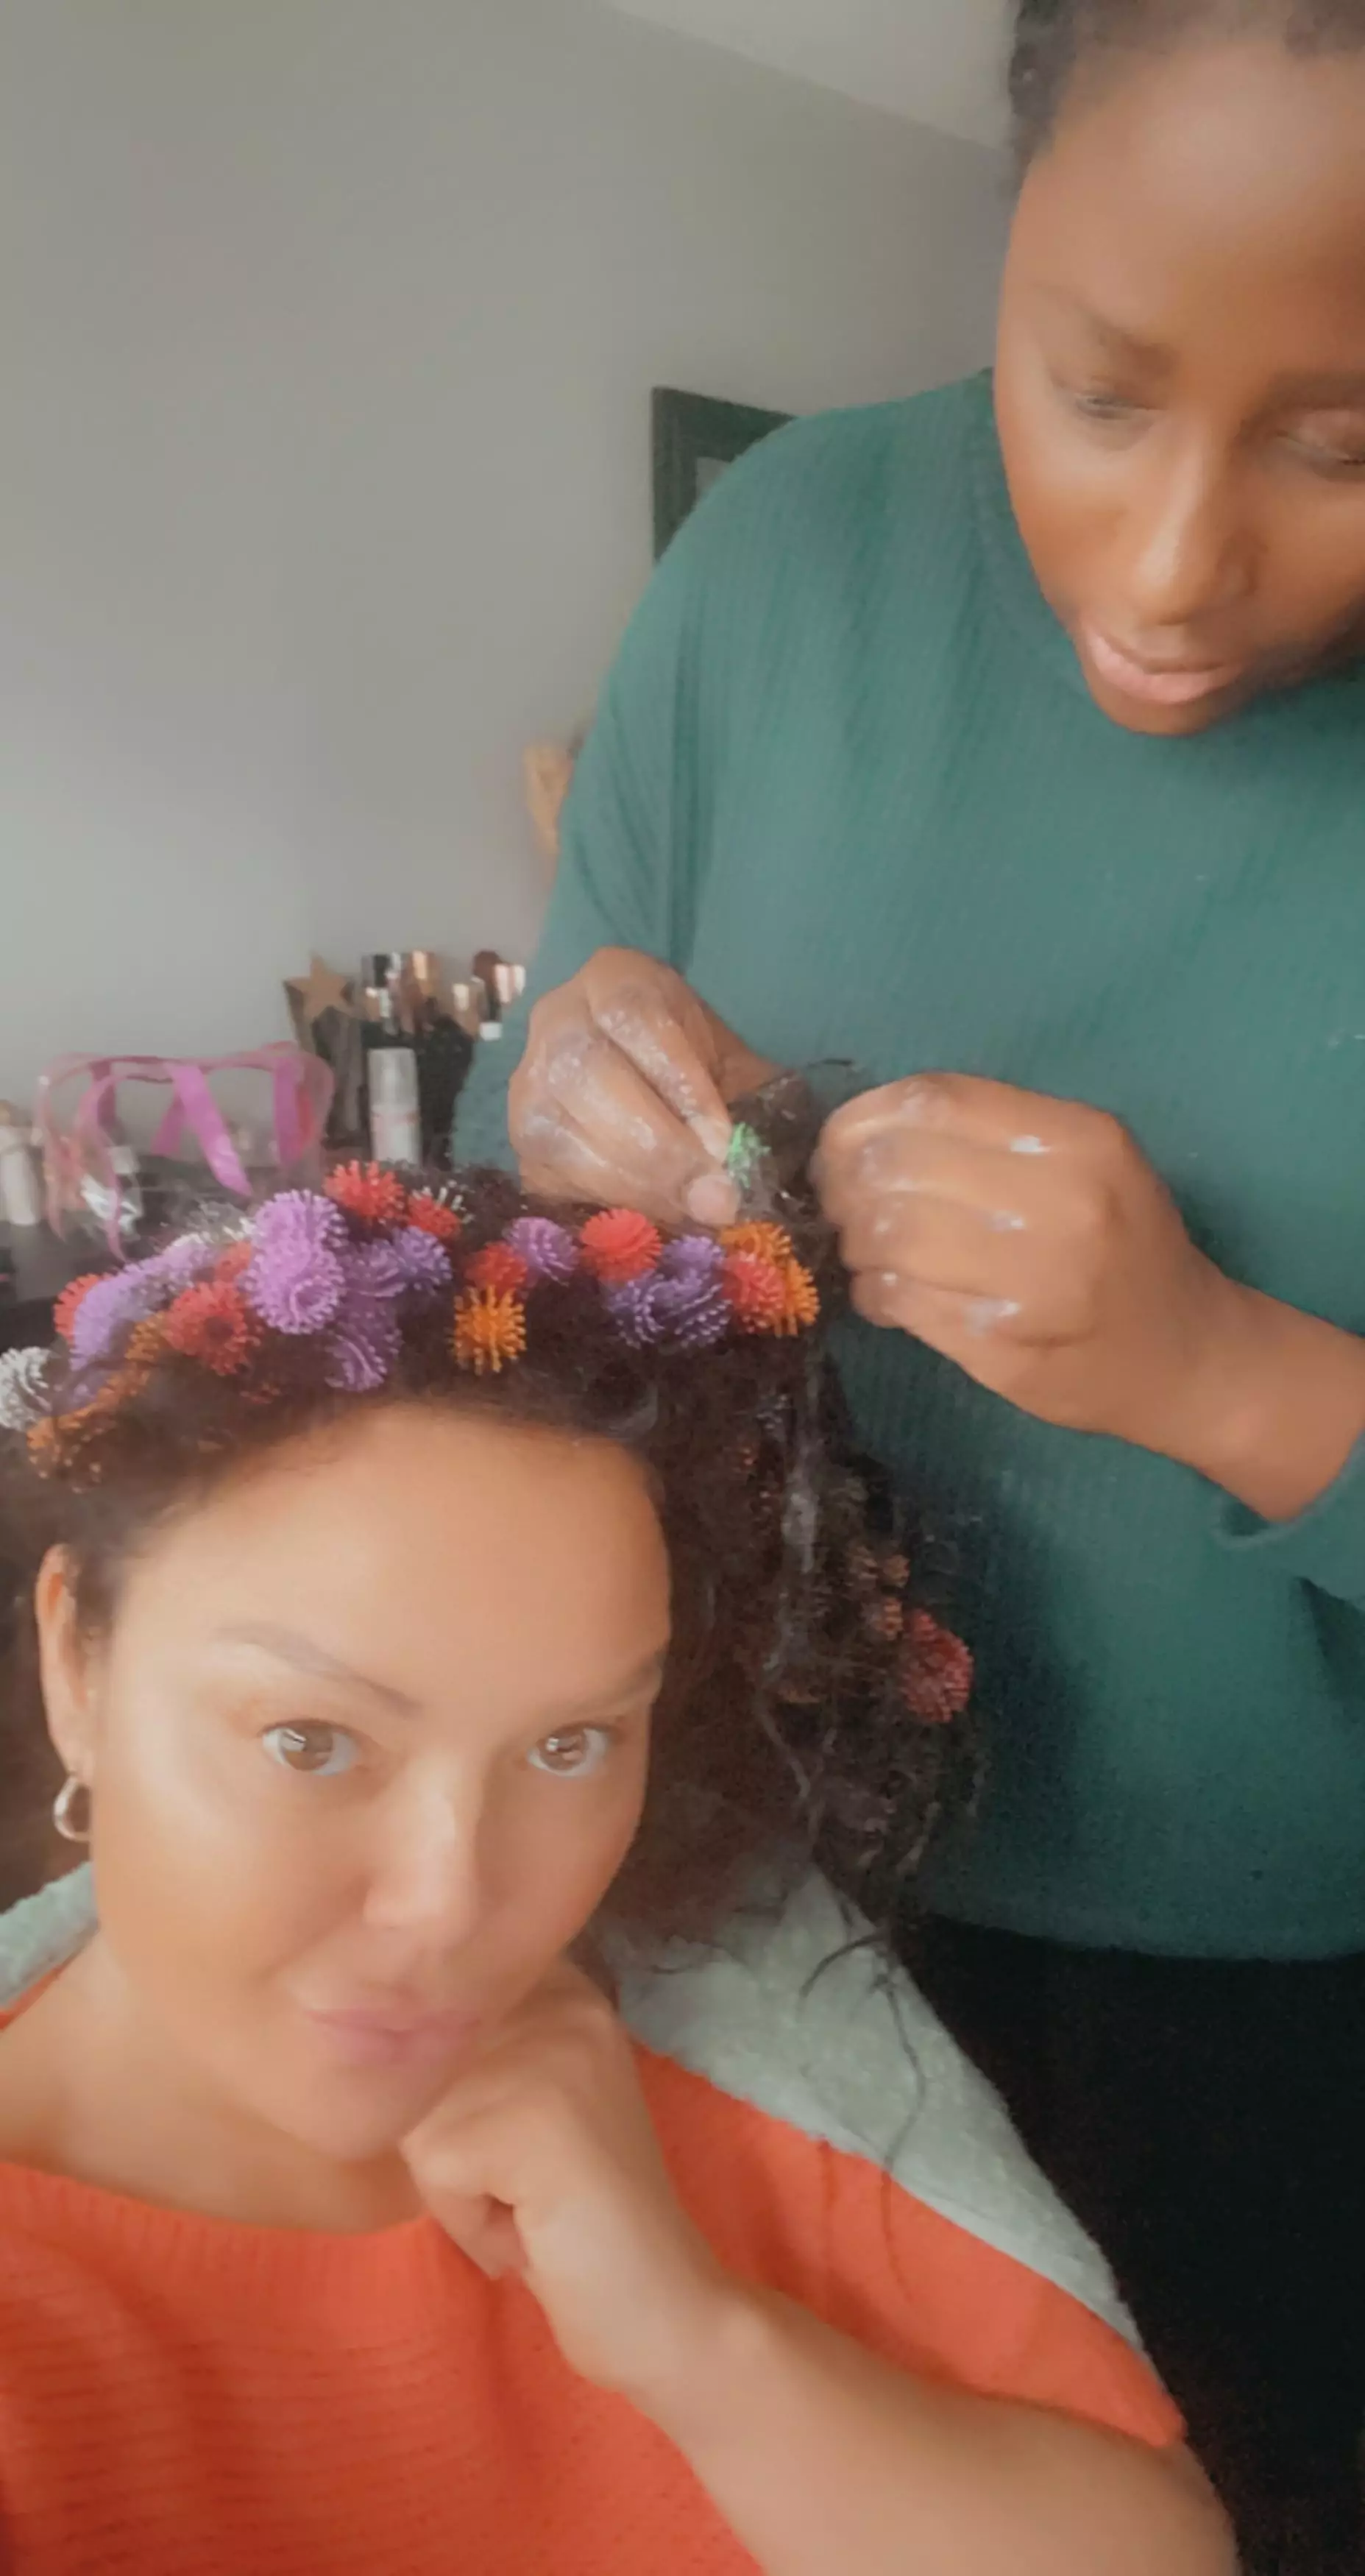 Donia Youssef thought nothing of letting her daughters put bunchems in her hair (